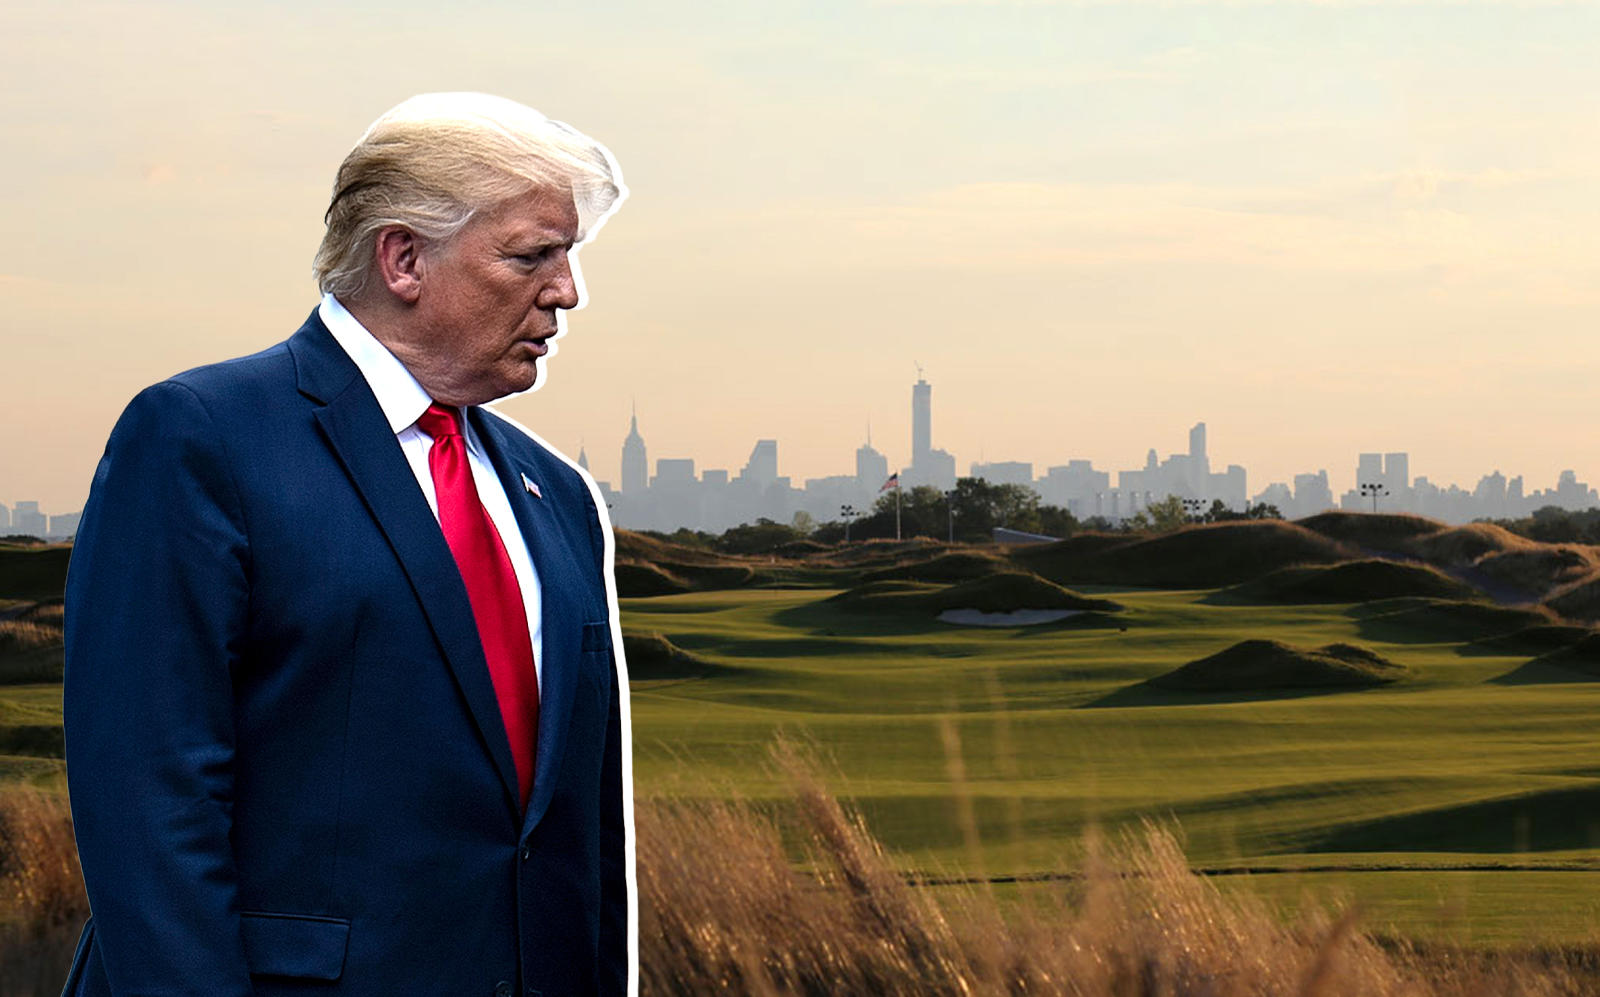 Trump Golf Links at Ferry Point and Donald Trump (Credit: Trump Ferry Point; Getty Images)